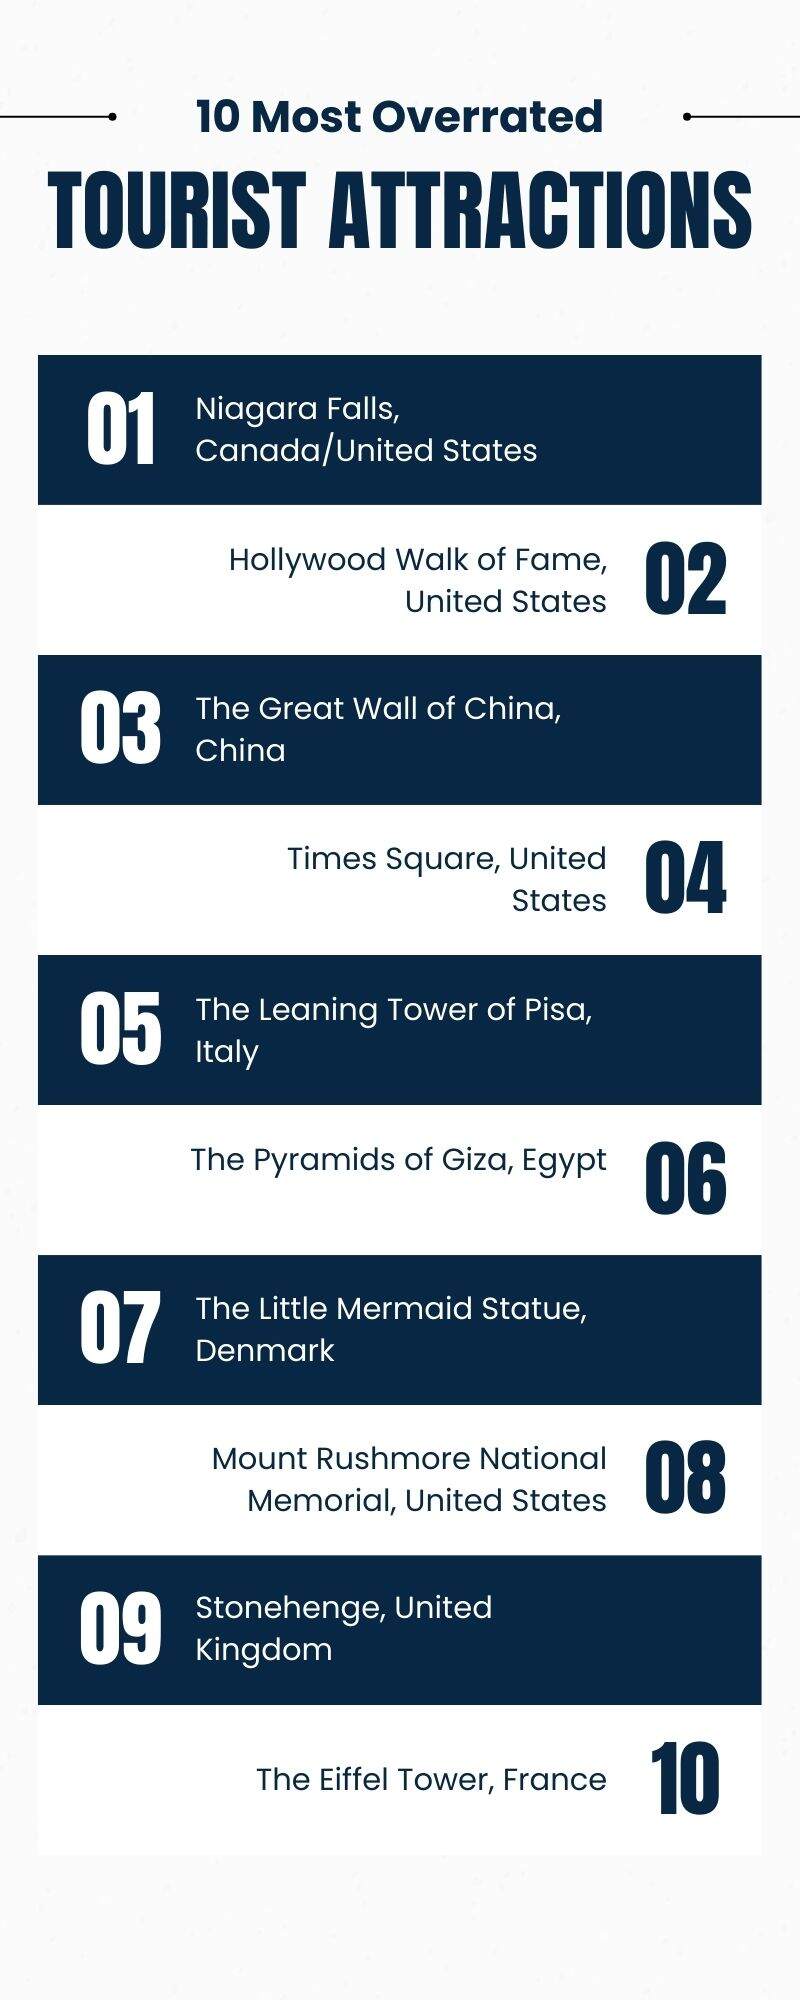 Most Overrated Tourist Attractions on the Planet